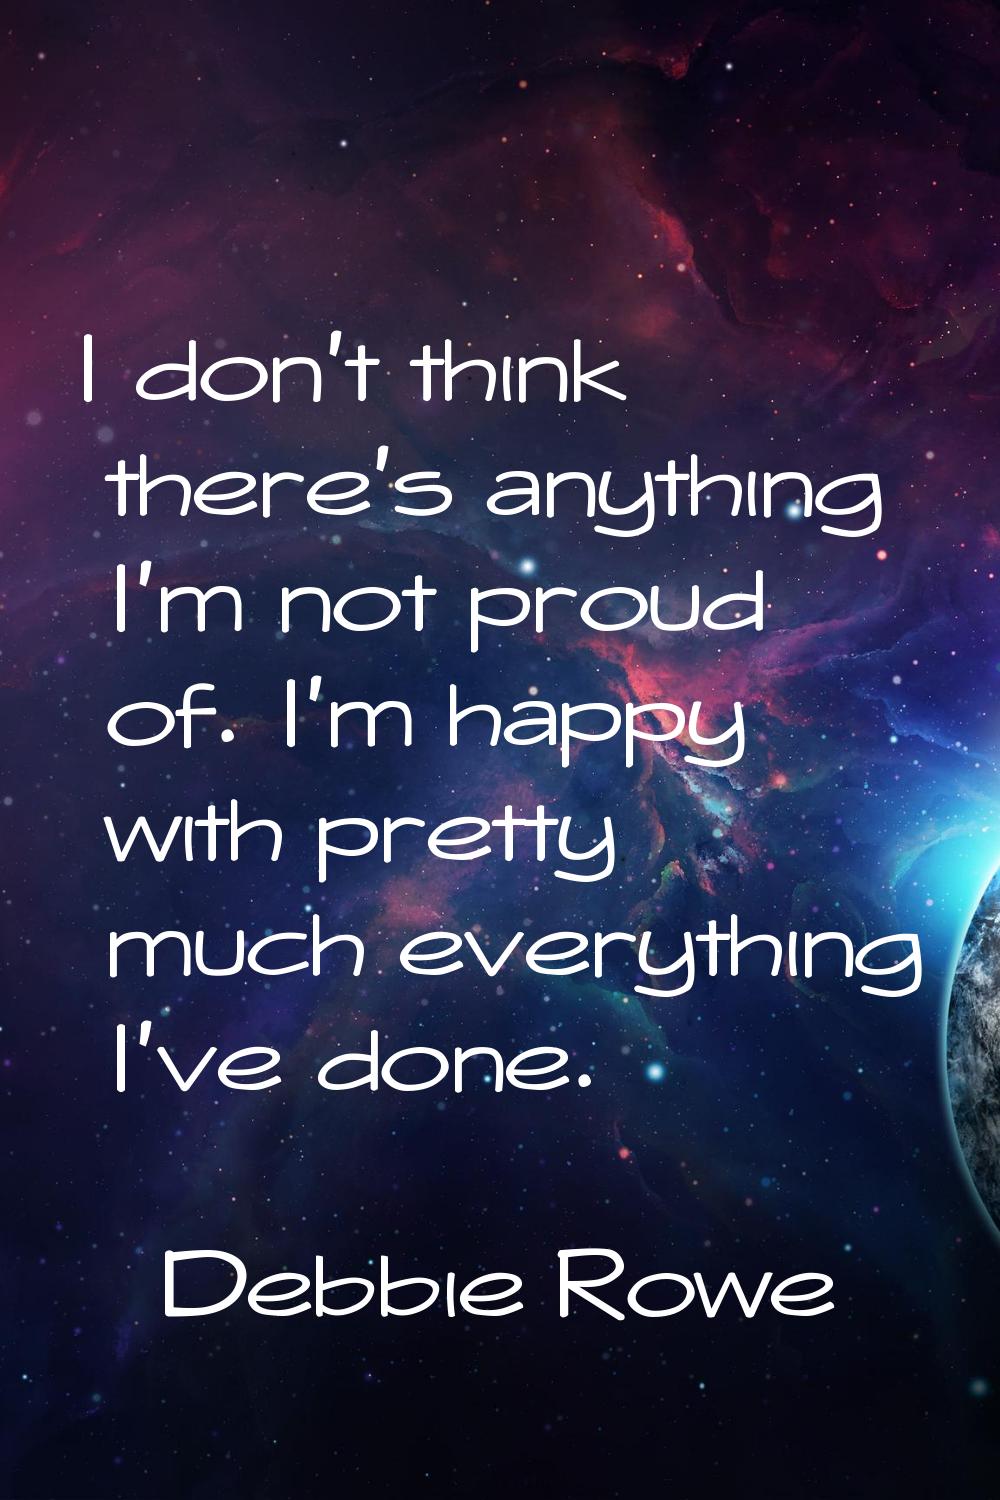 I don't think there's anything I'm not proud of. I'm happy with pretty much everything I've done.